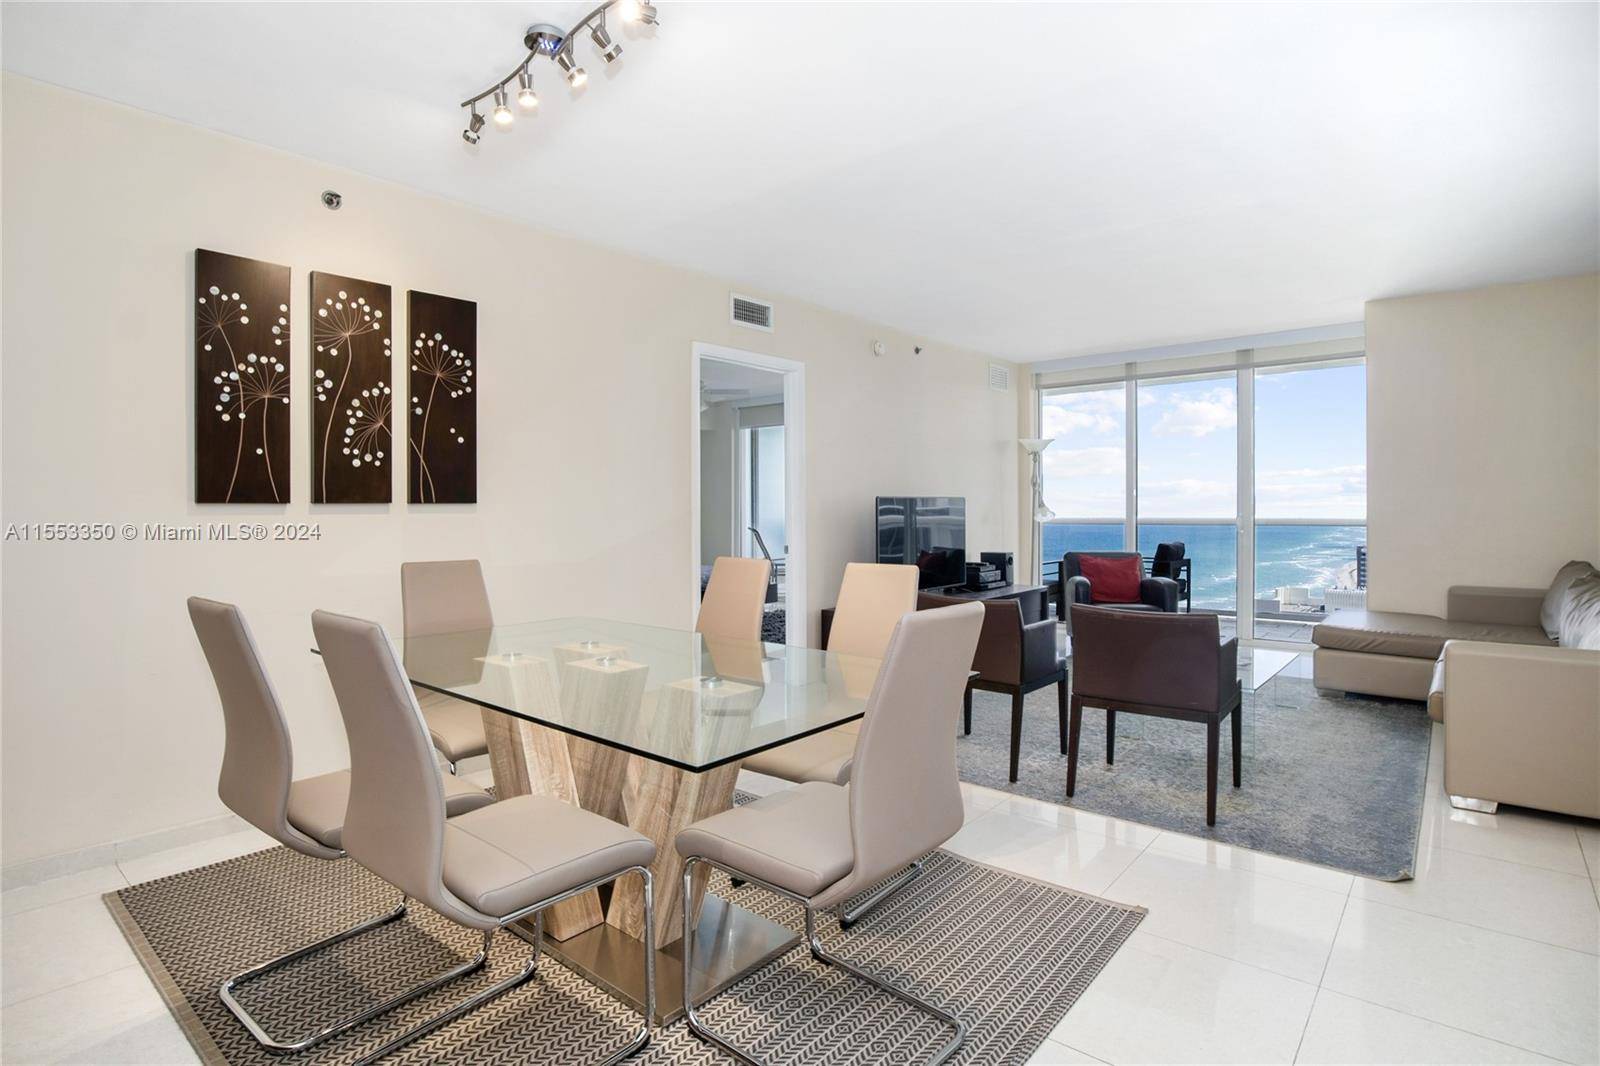 This stunningly fully furnished unit boasts breathtaking ocean and Intracoastal views.